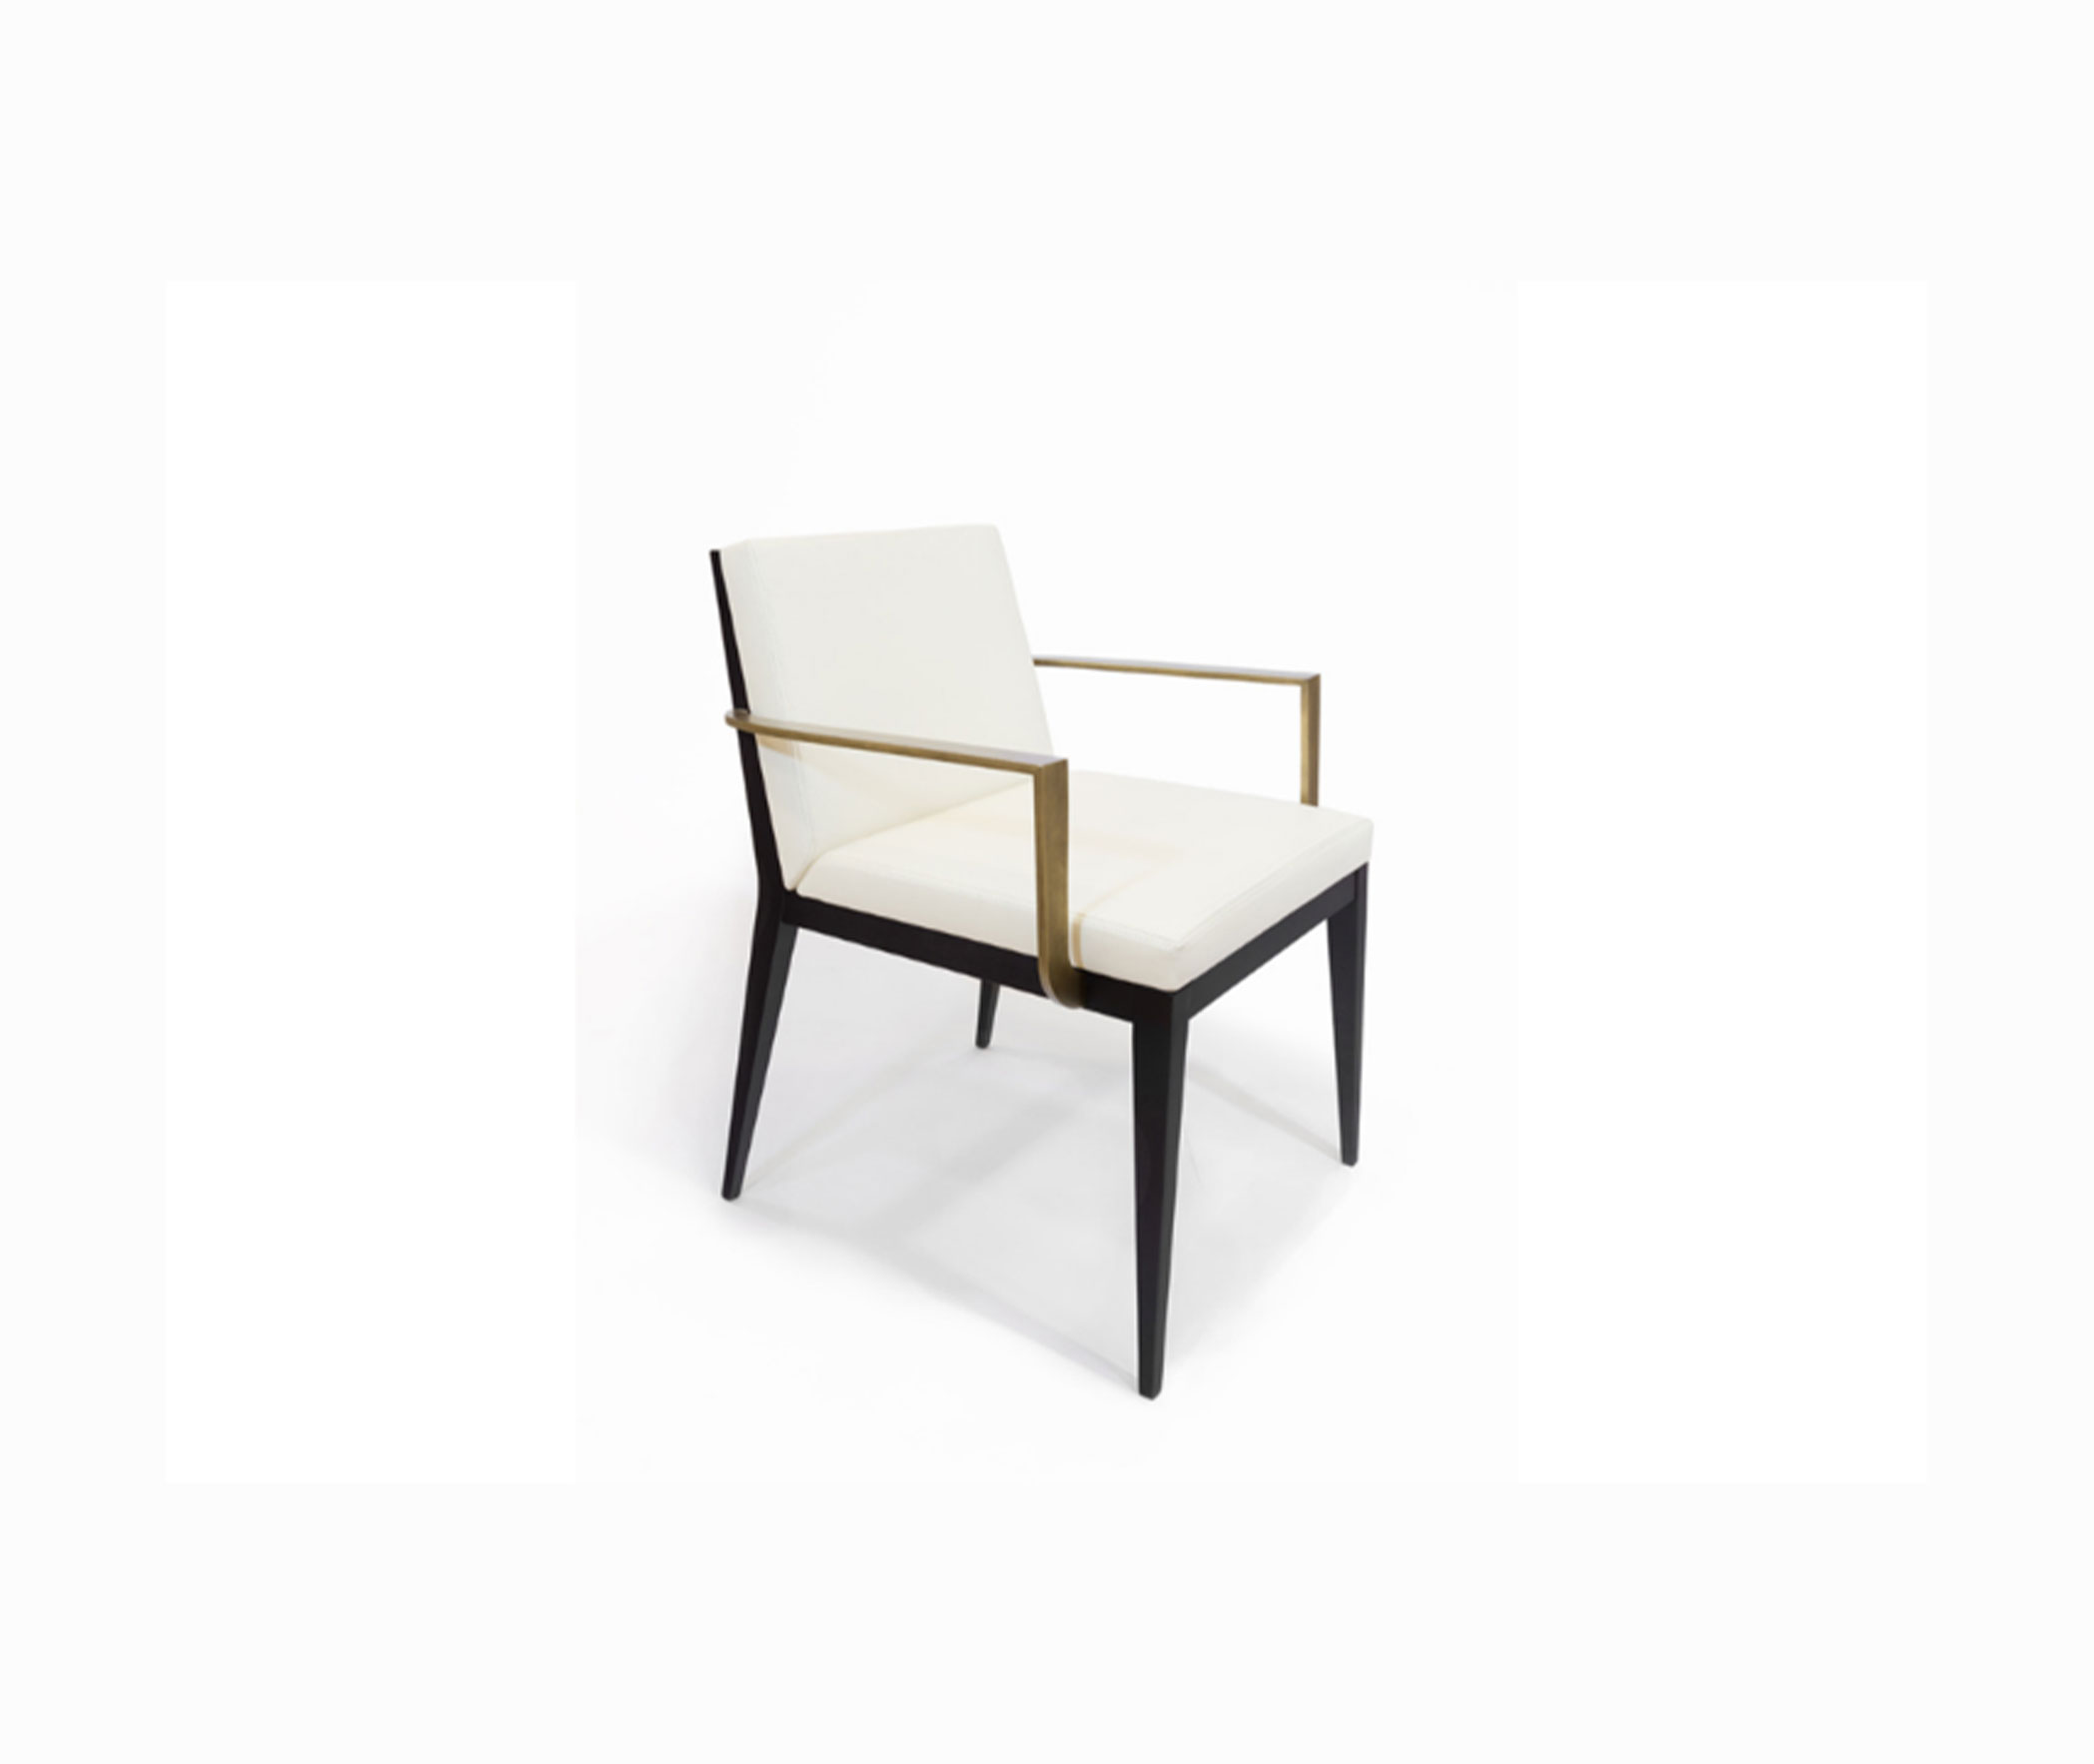 Profiles_Amelie-Dining-Chair-1_int_products-1